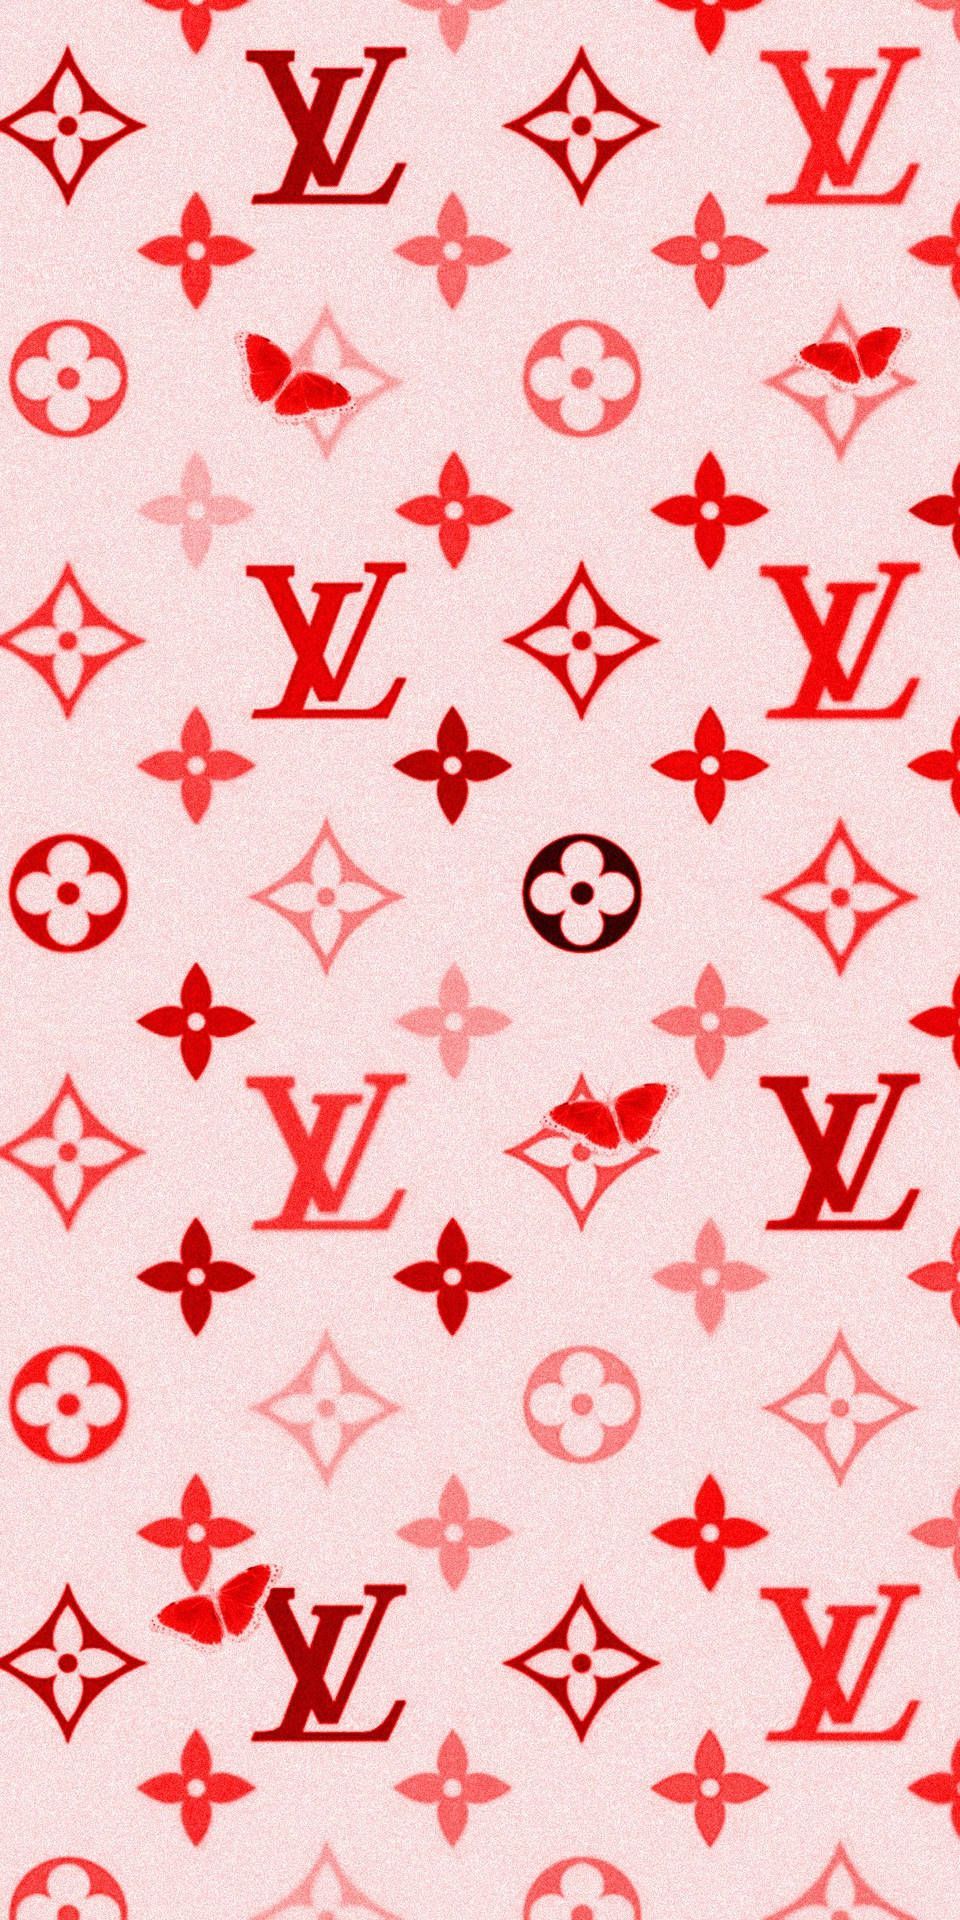 IPhone wallpaper with a red Louis Vuitton pattern - Louis Vuitton